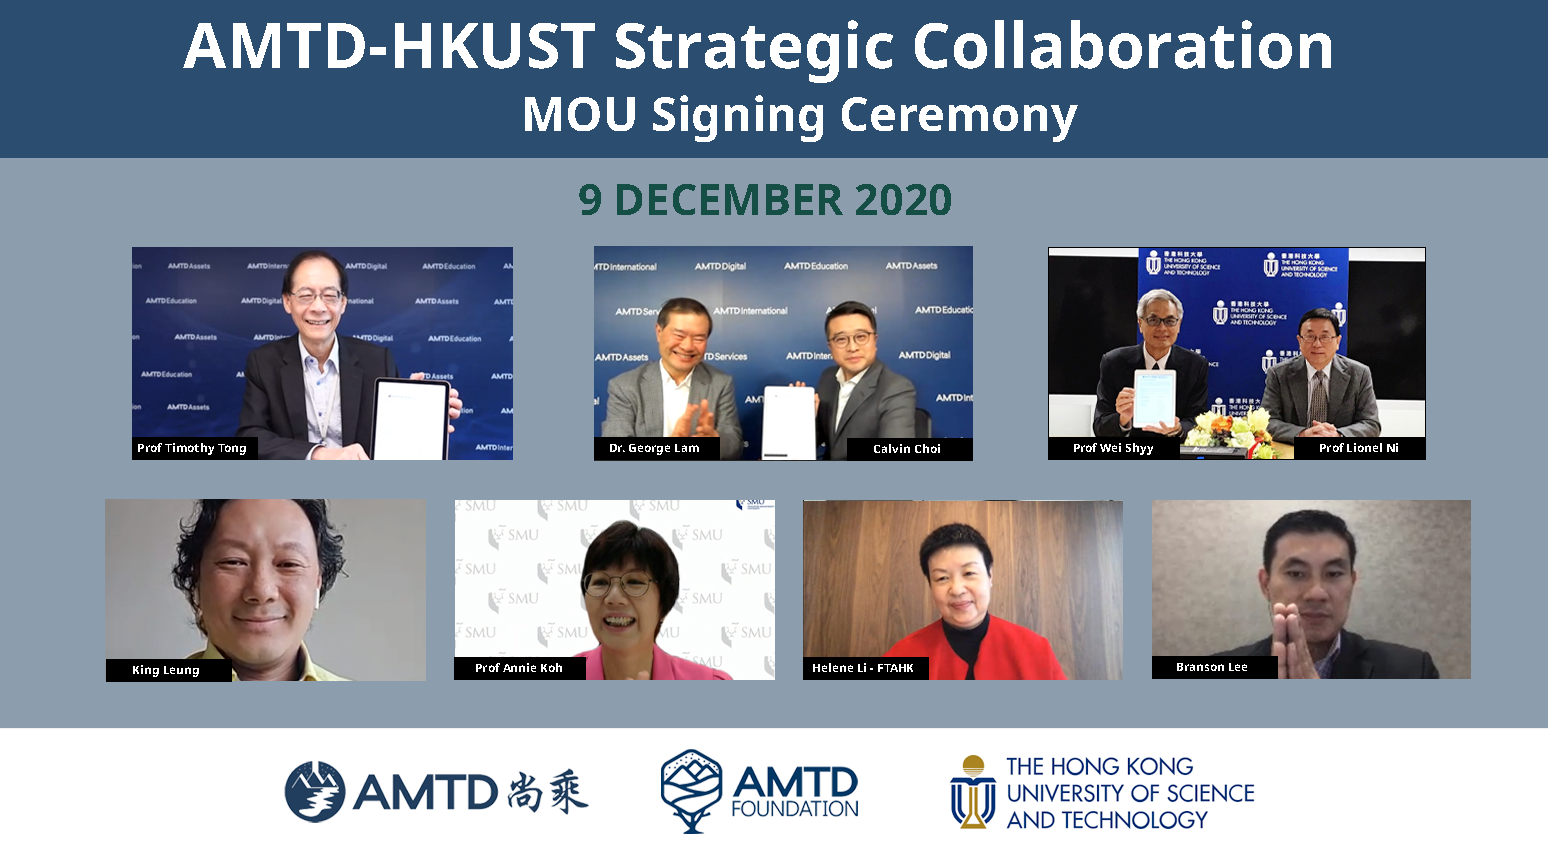 AMTD News | AMTD’s strategic collaboration with HKUST is sealed to focus on grooming the next generation of digital and innovation leaders to connect the Greater Bay Area with South East Asia